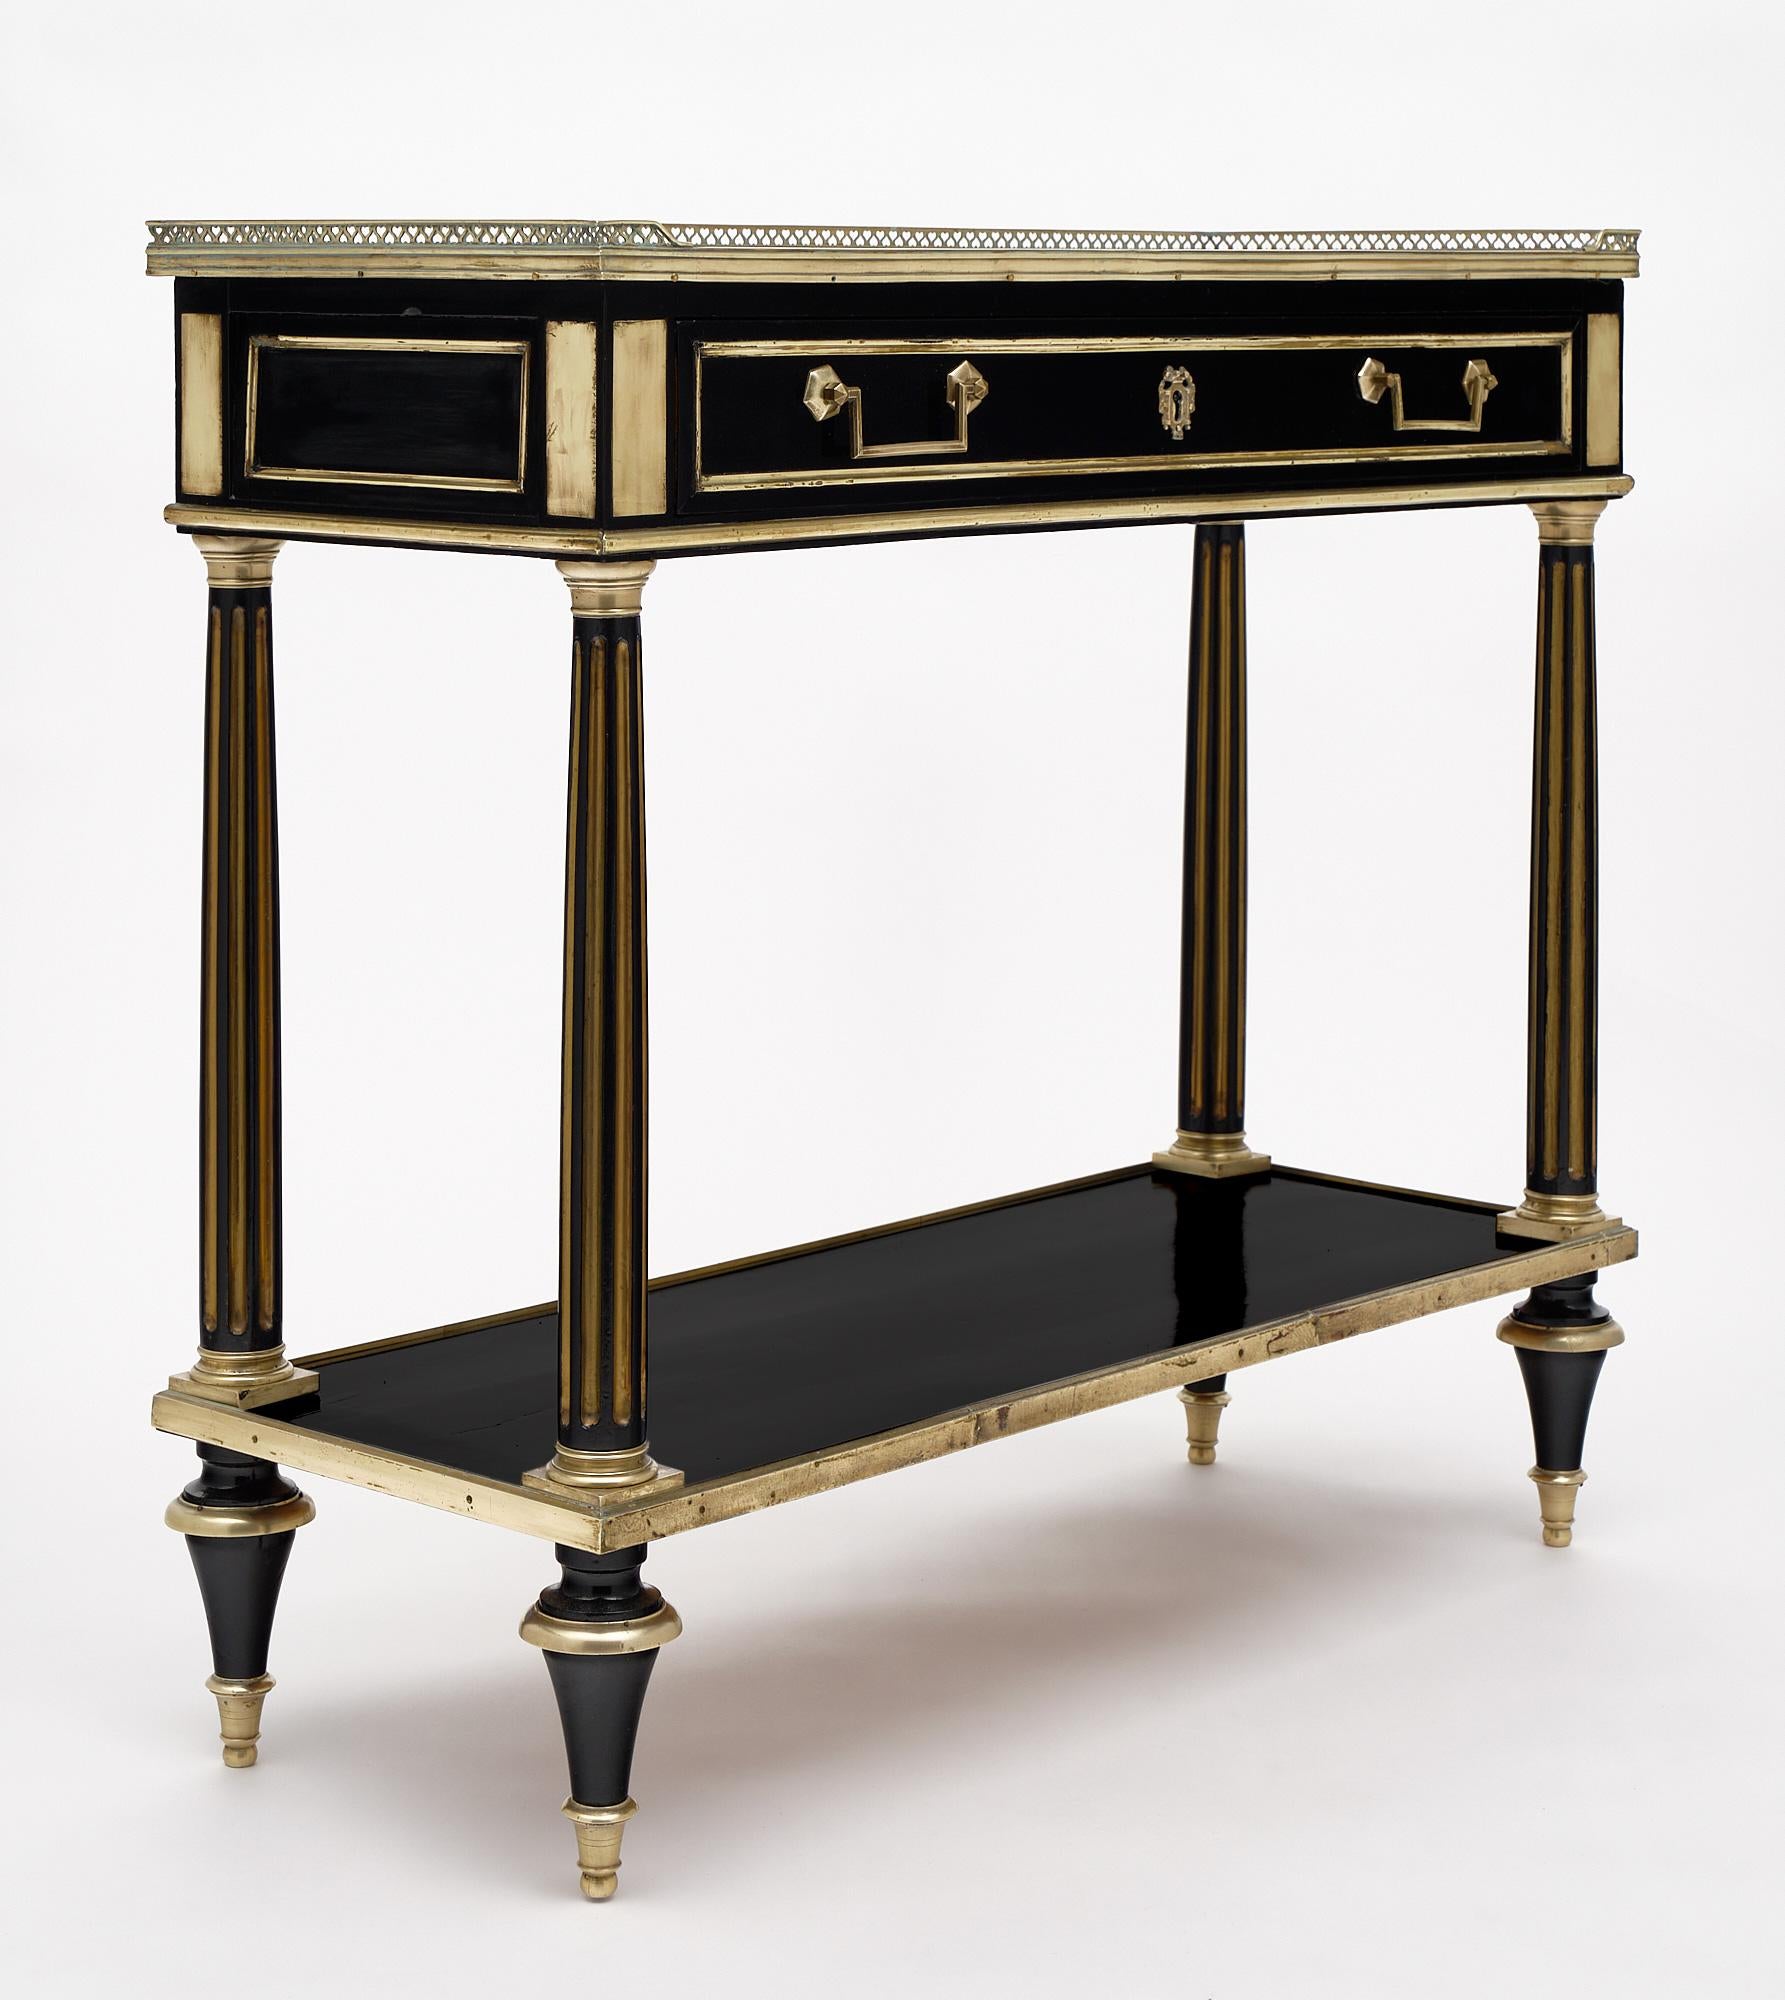 Louis XVI style French console table in the Louis XVI style made of mahogany and finished with gilt brass details throughout. This piece is ebonized and has a hand-rubbed French polish. The top is mirrored and we love the functional shelf below.